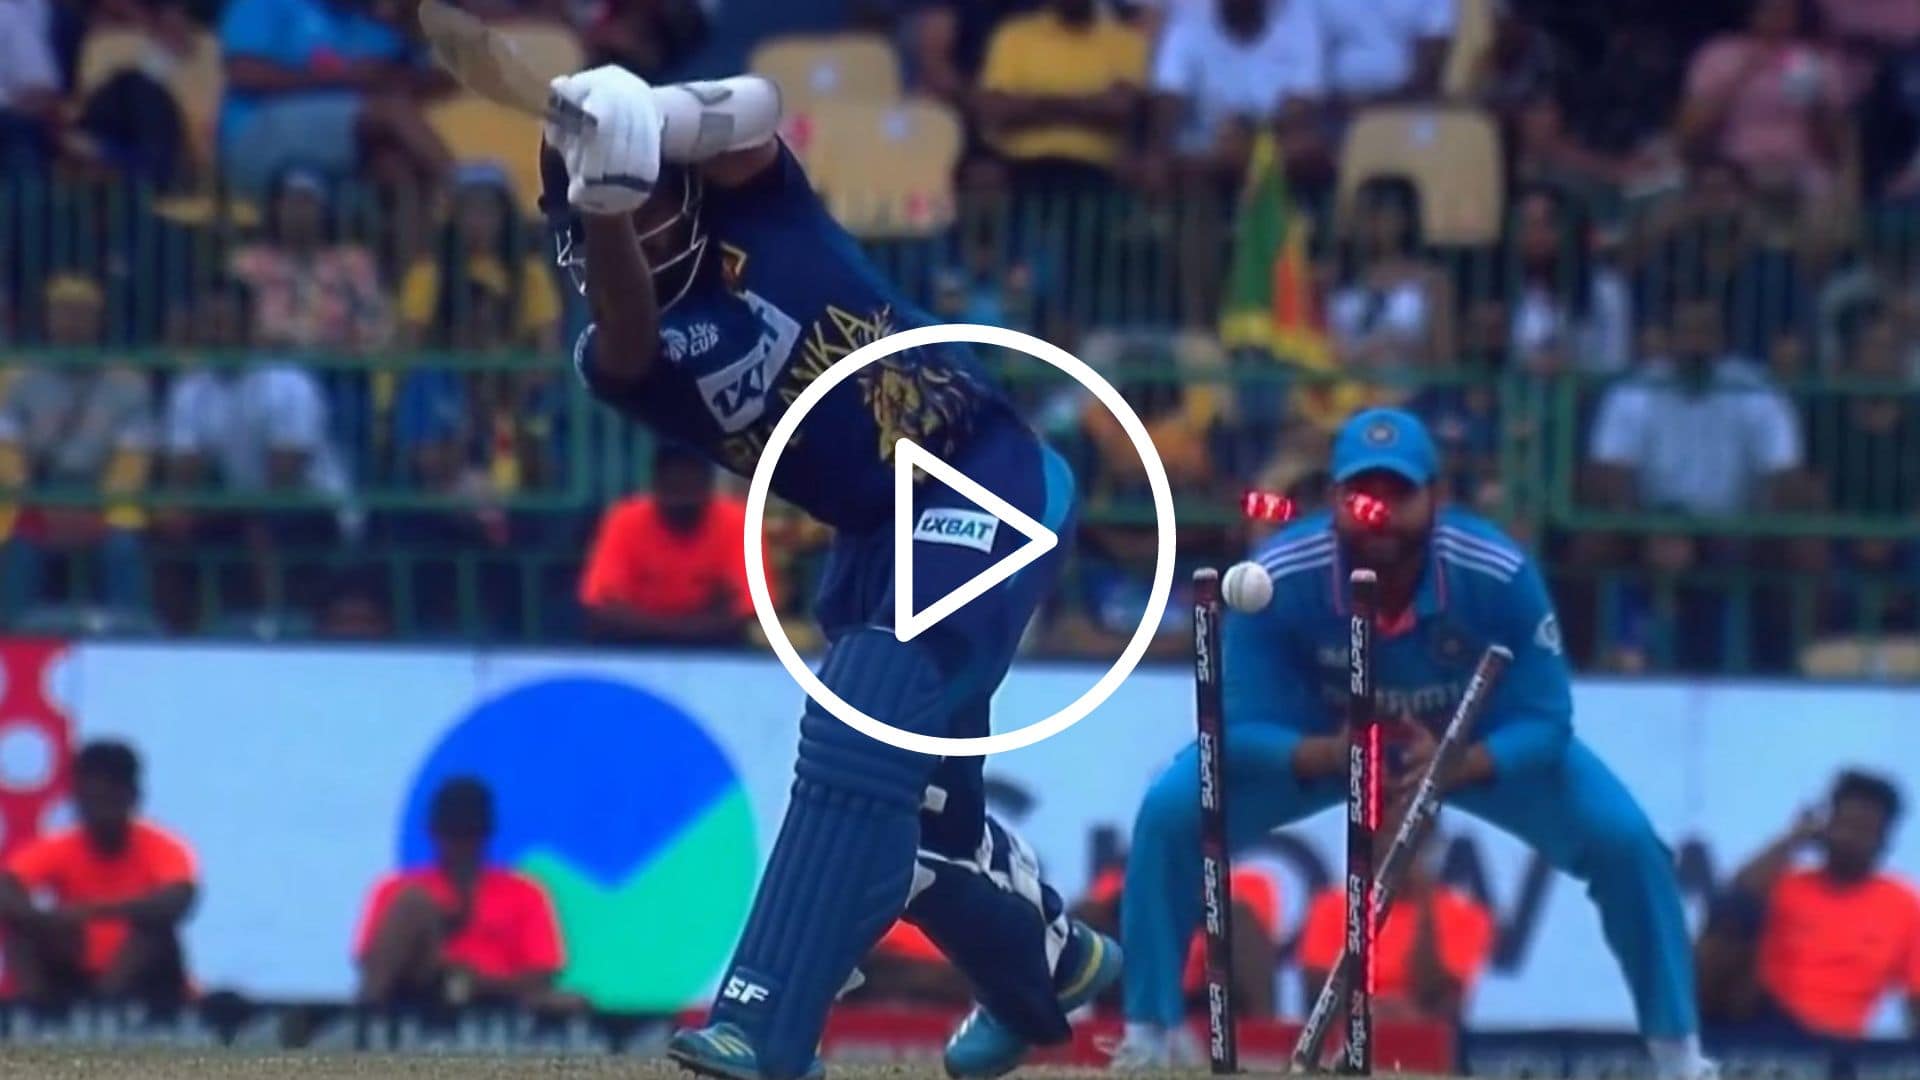 [Watch] Mohammed Siraj Shatters Kusal Mendis' Middle Stump With Unplayable Delivery